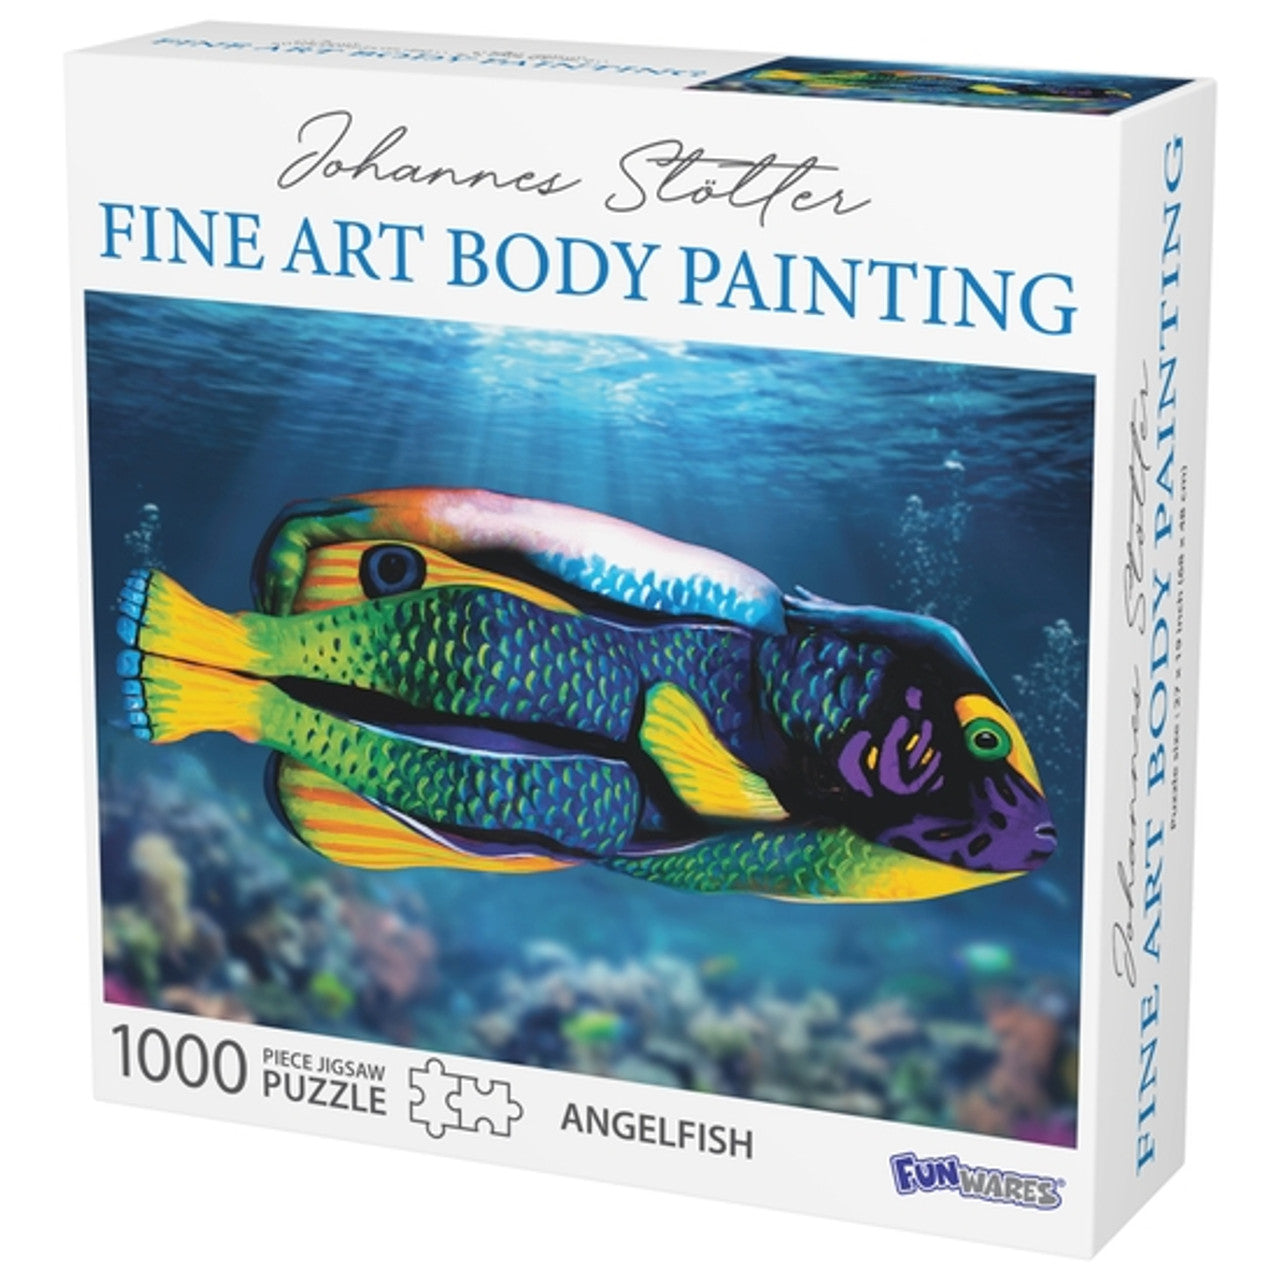 FINE ART BODY PAINTING PUZZLE